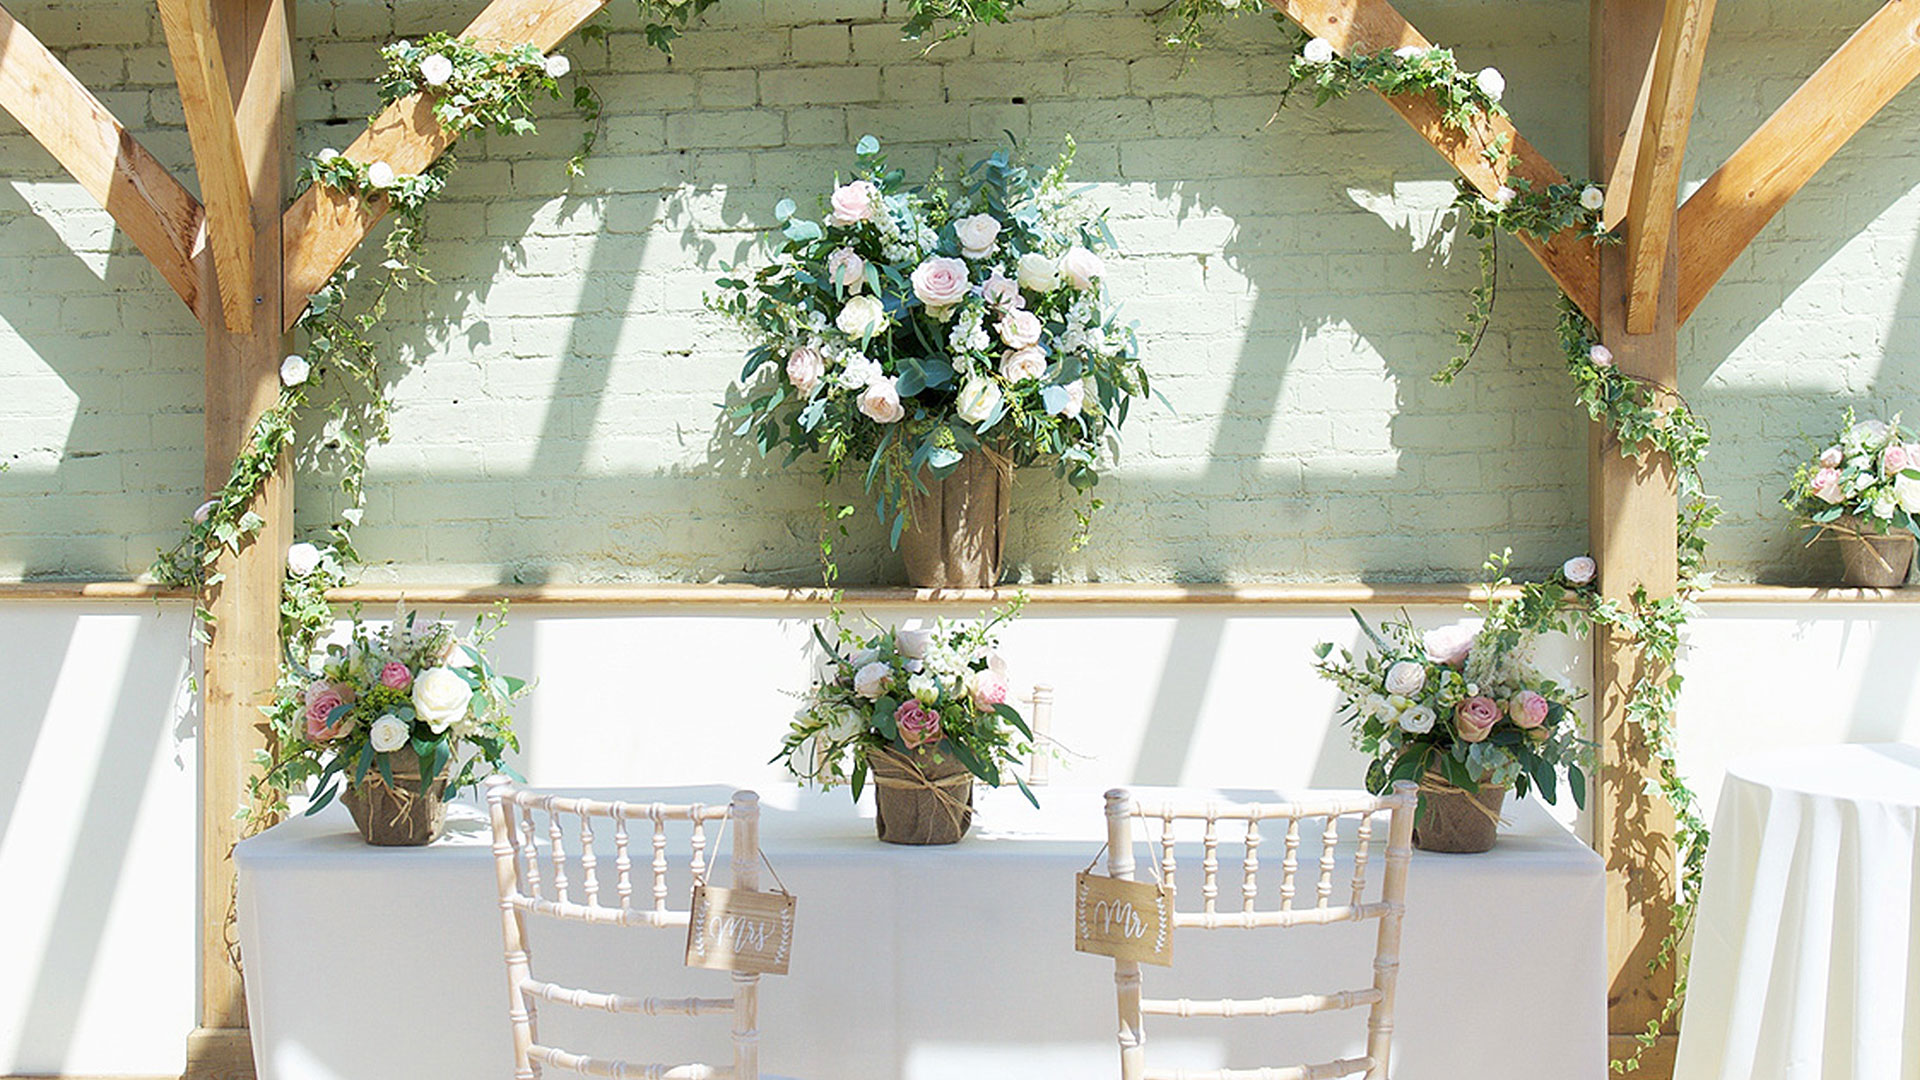 Pale pink and white roses decorate the wedding ceremony table in hessian baskets - rustic wedding ideas